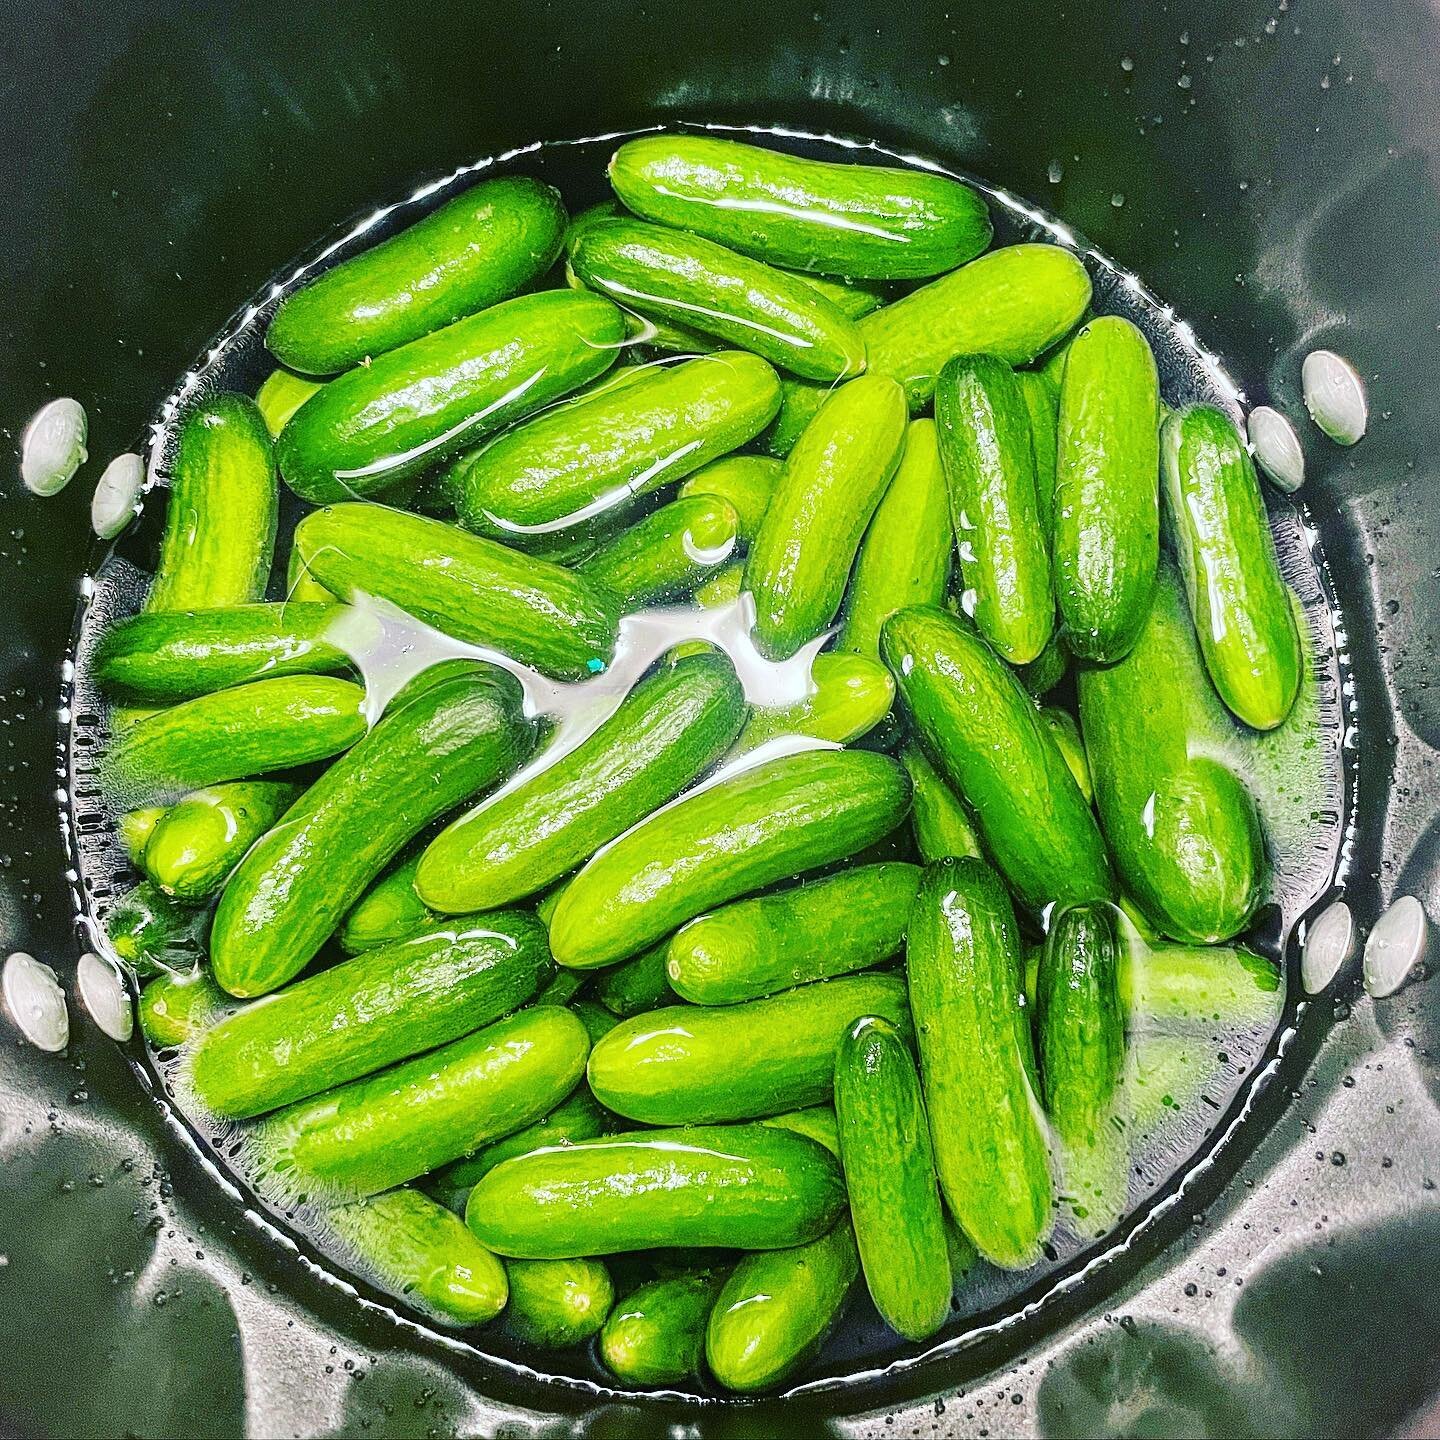 Bath time 

#sizematters #2inchesorless #pickles #dillpickles #gherkins #fermentedfoods #picklesforsale #homemadepickles #picklesarelife #gherkinsarelife #nobigdill #babycukes #babycukesarethebest #chicagopickles